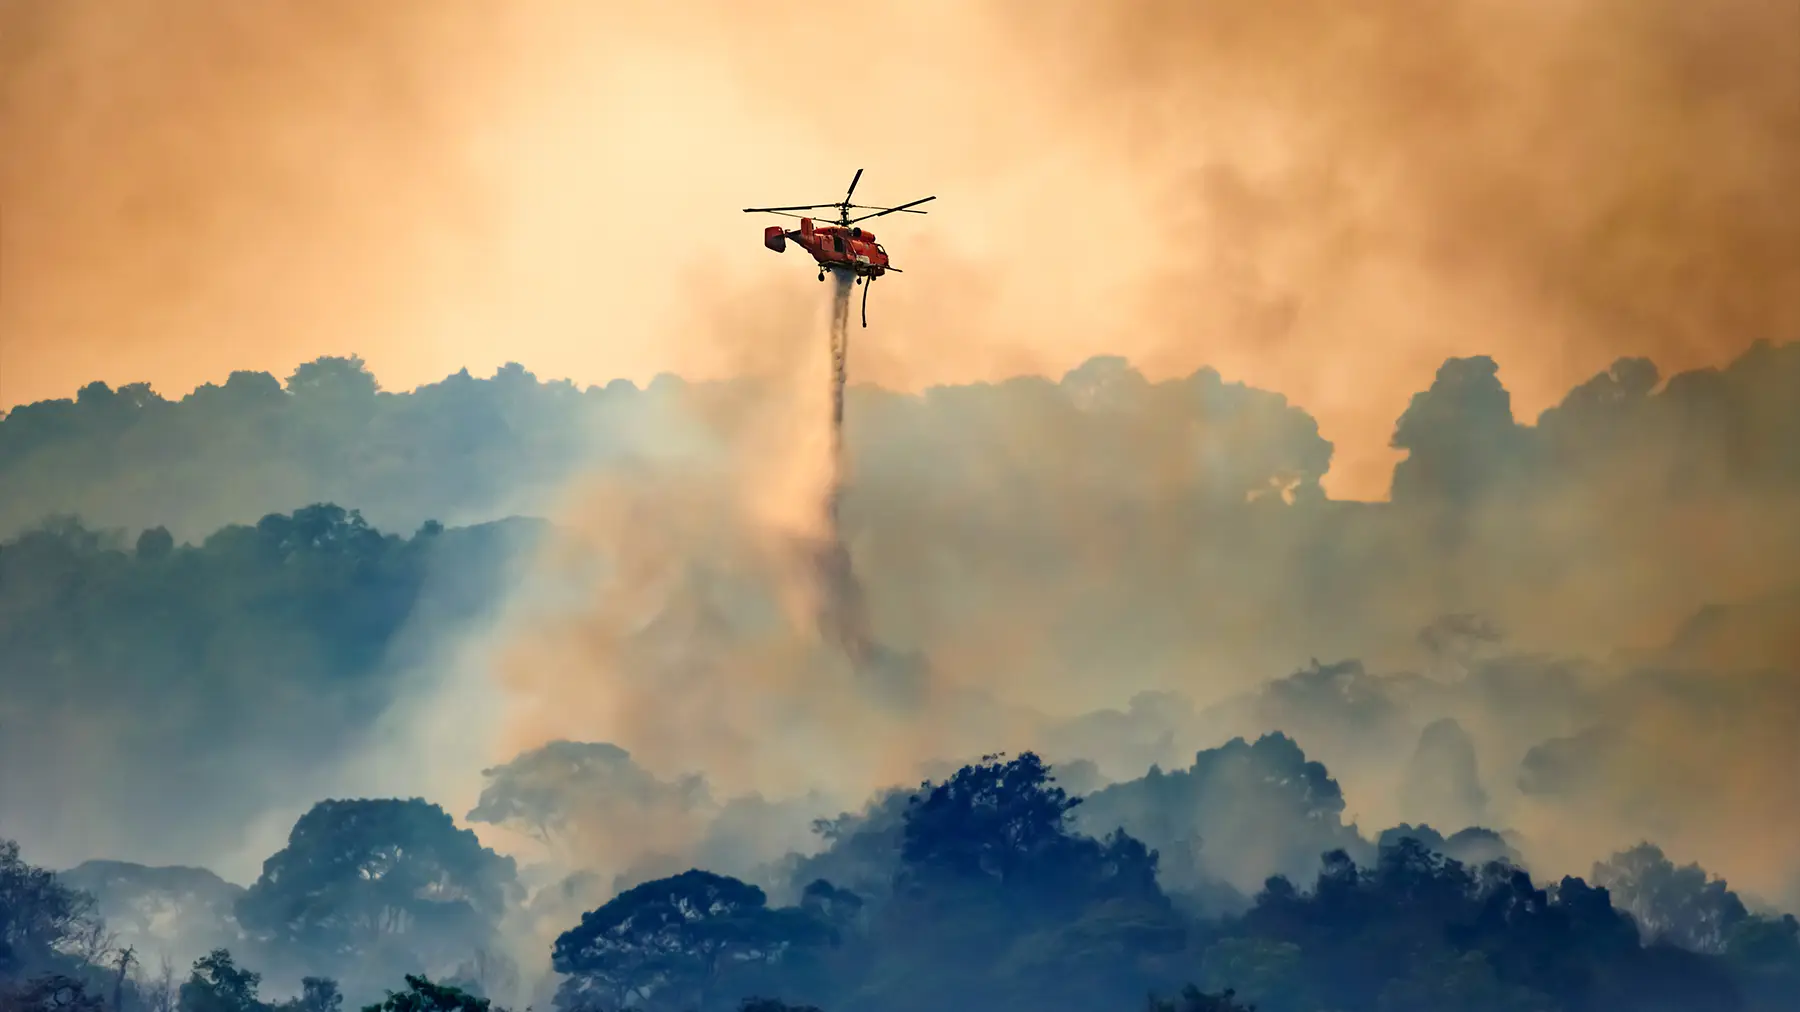 Helicopter fighting widespread forest fires